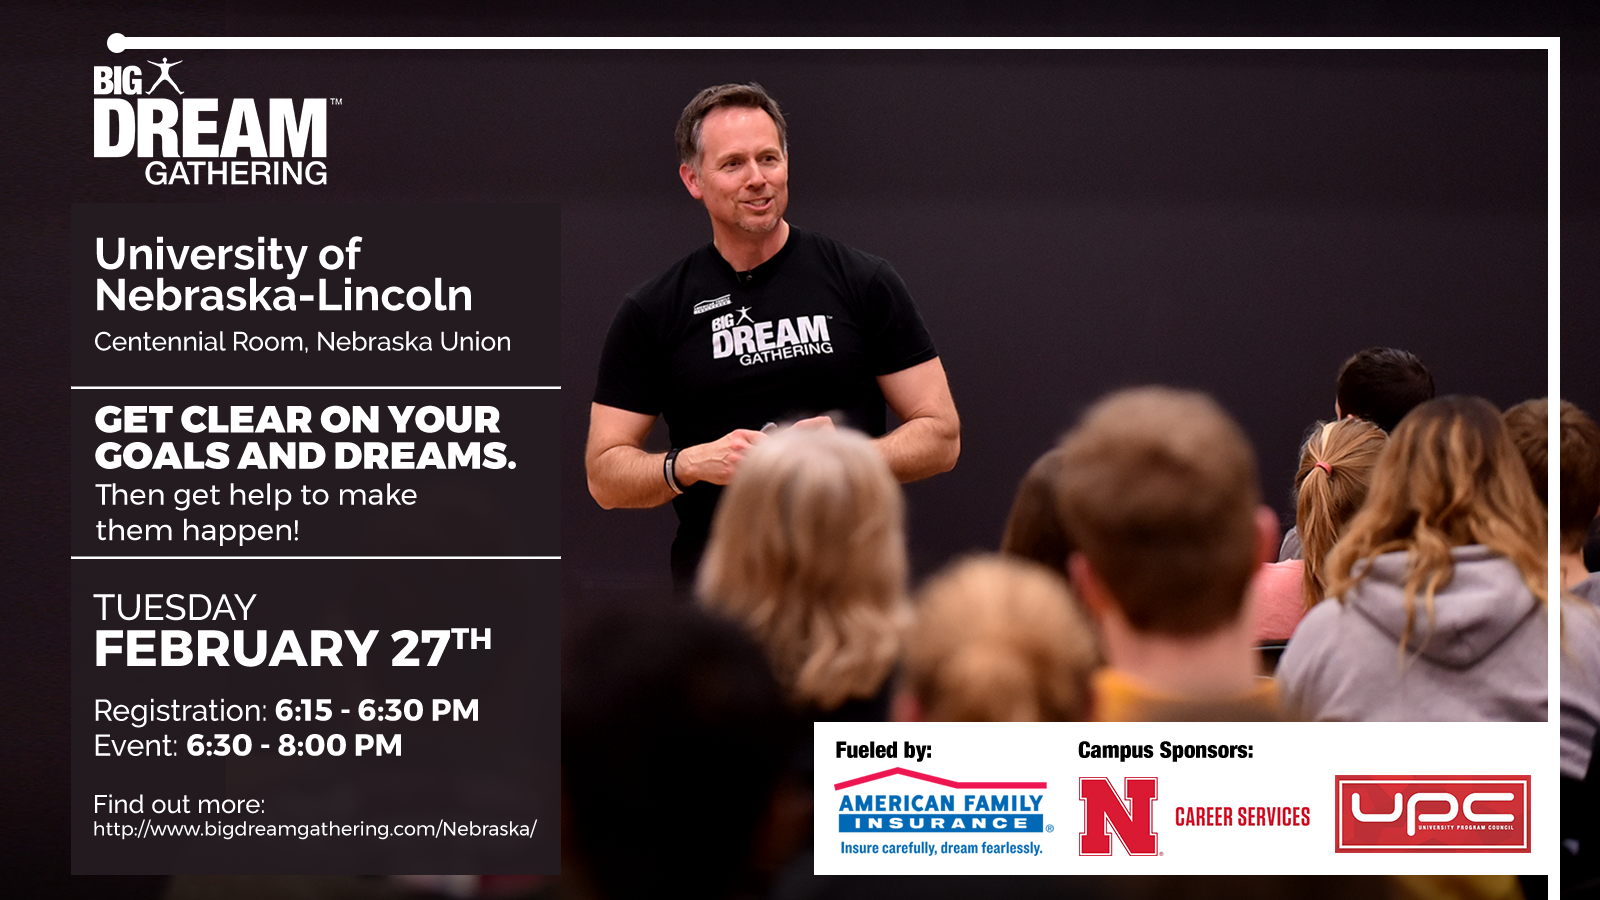 Come receive some awesome swag and possibly a free copy of Keynote Mitch Matthew’s book, “Ignite,” but more importantly the opportunity and motivation to let yourselves be open to your biggest dreams.